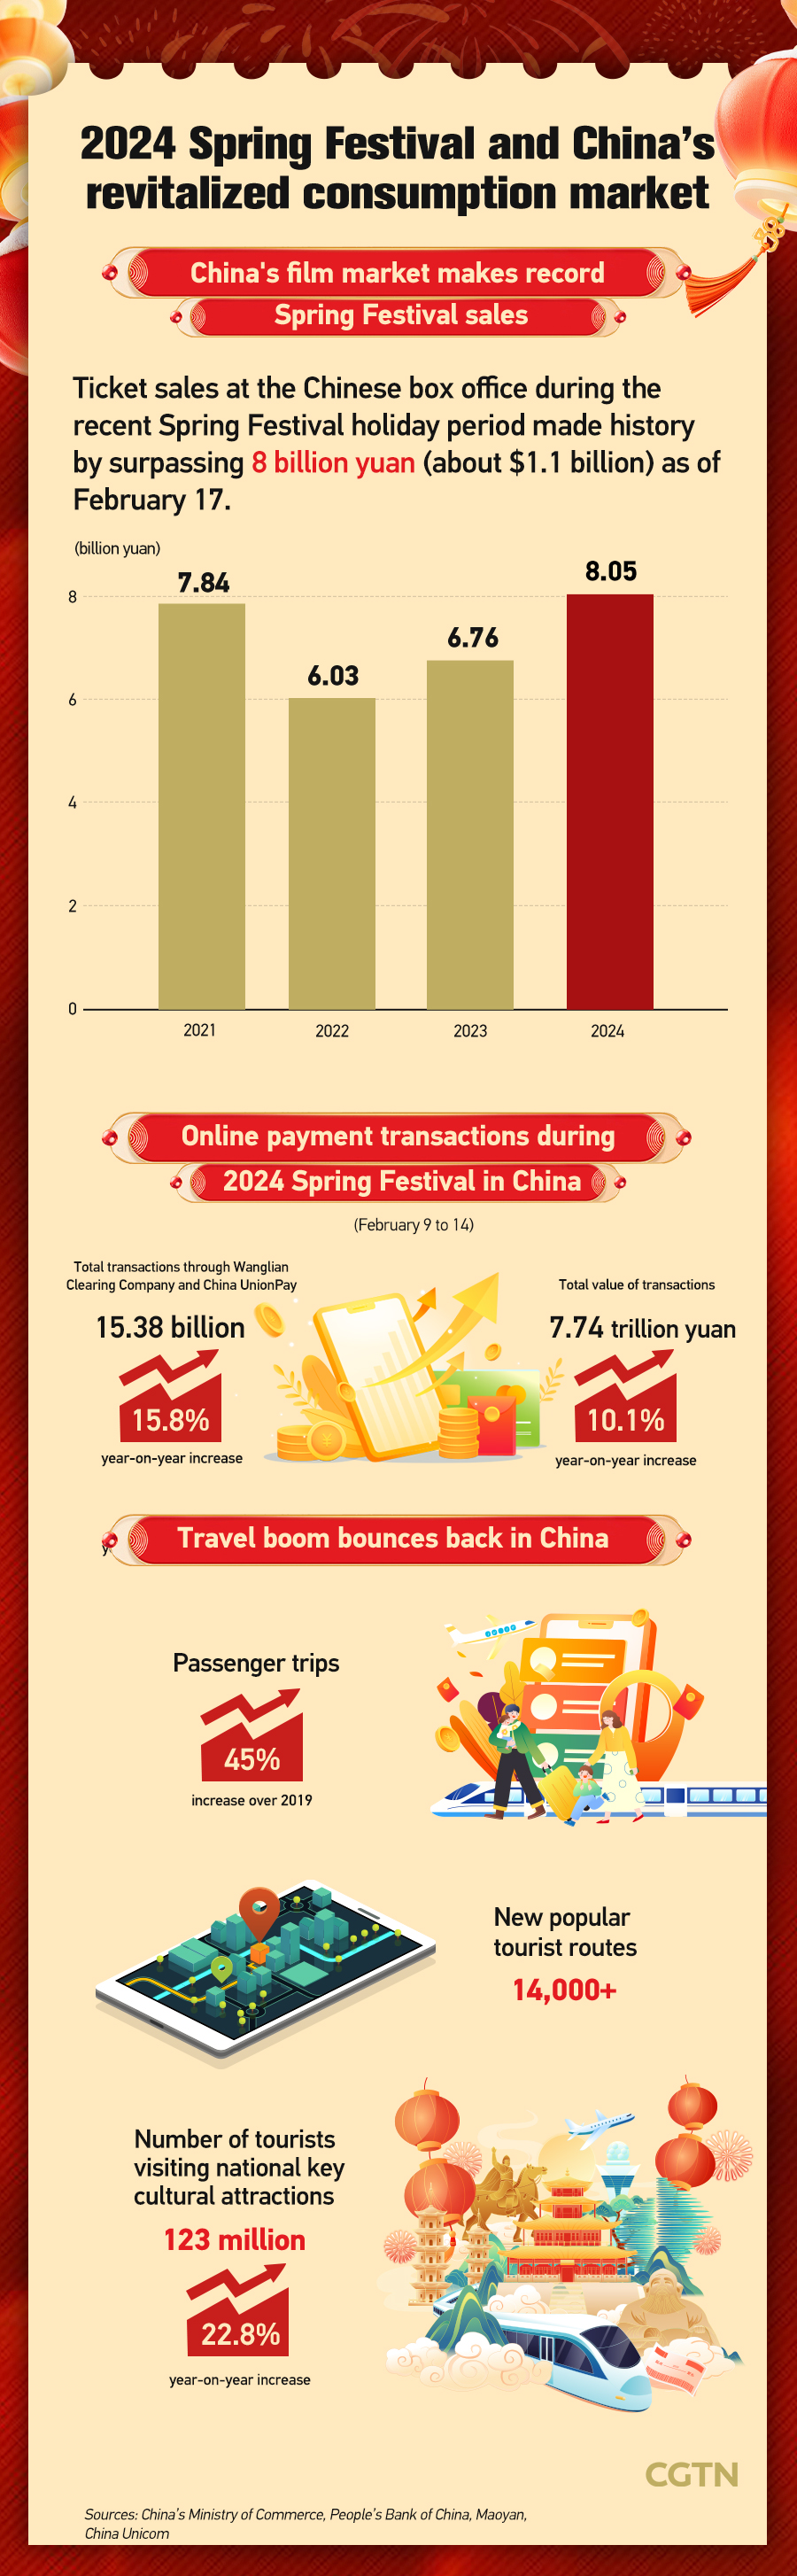 2024 Spring Festival and China's revitalized consumption market